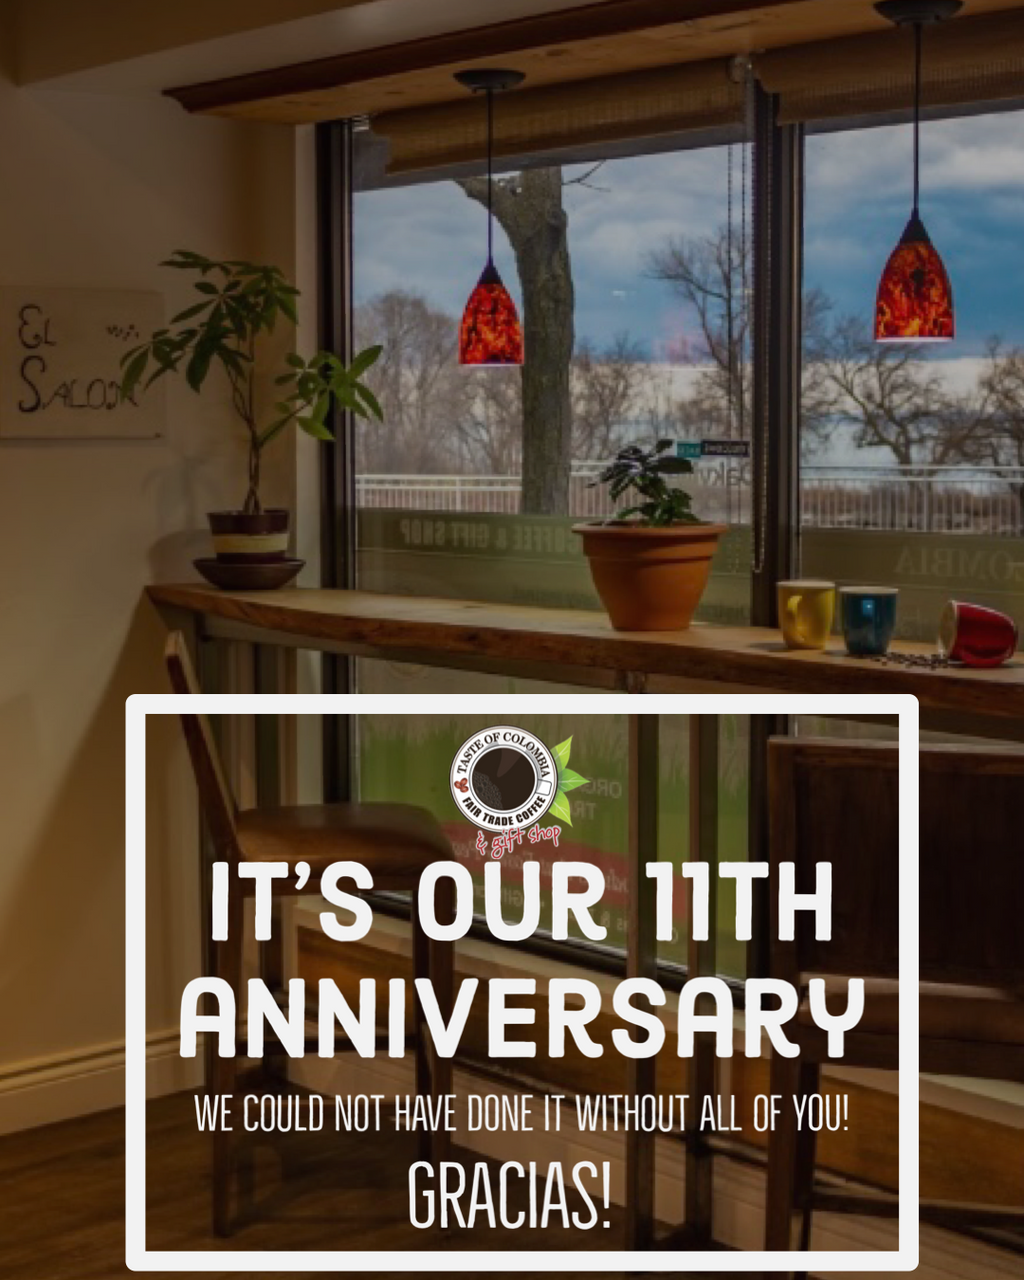 Our 11th Anniversary!